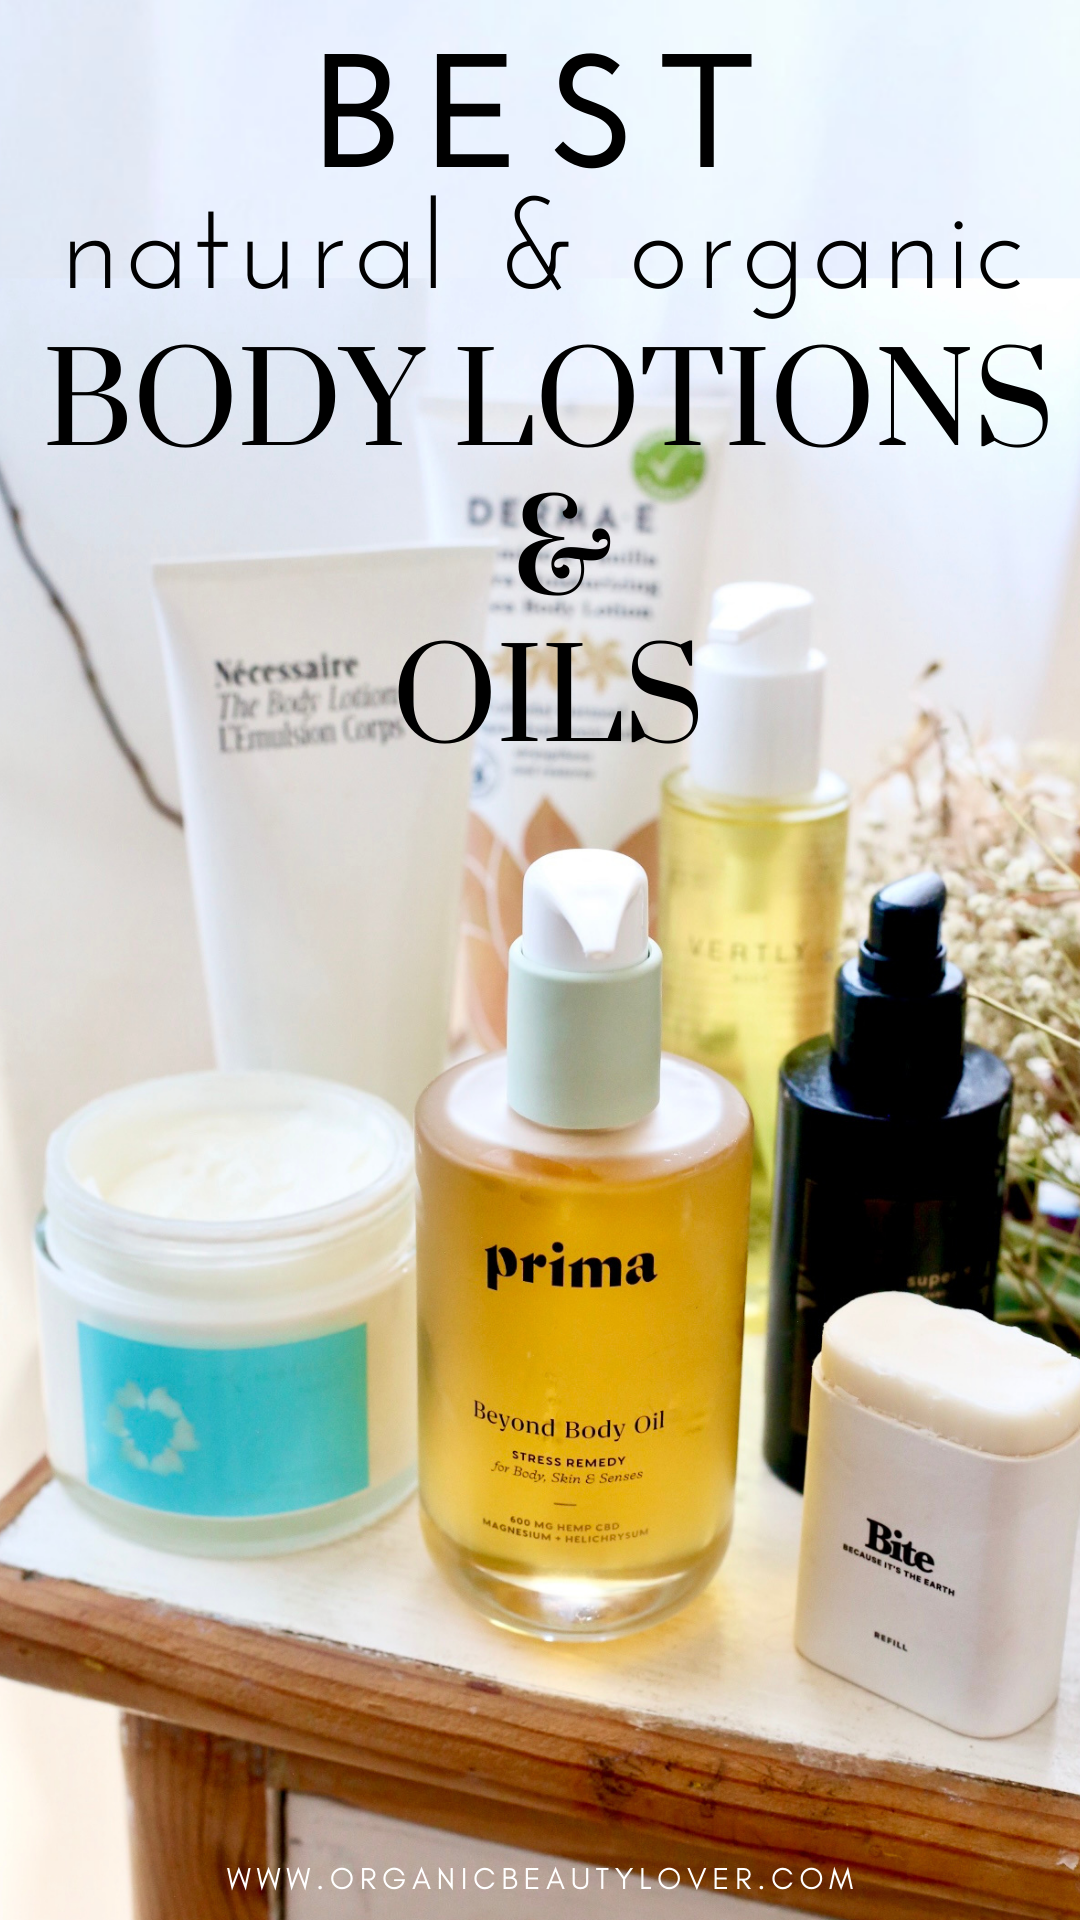 Best natural body lotions